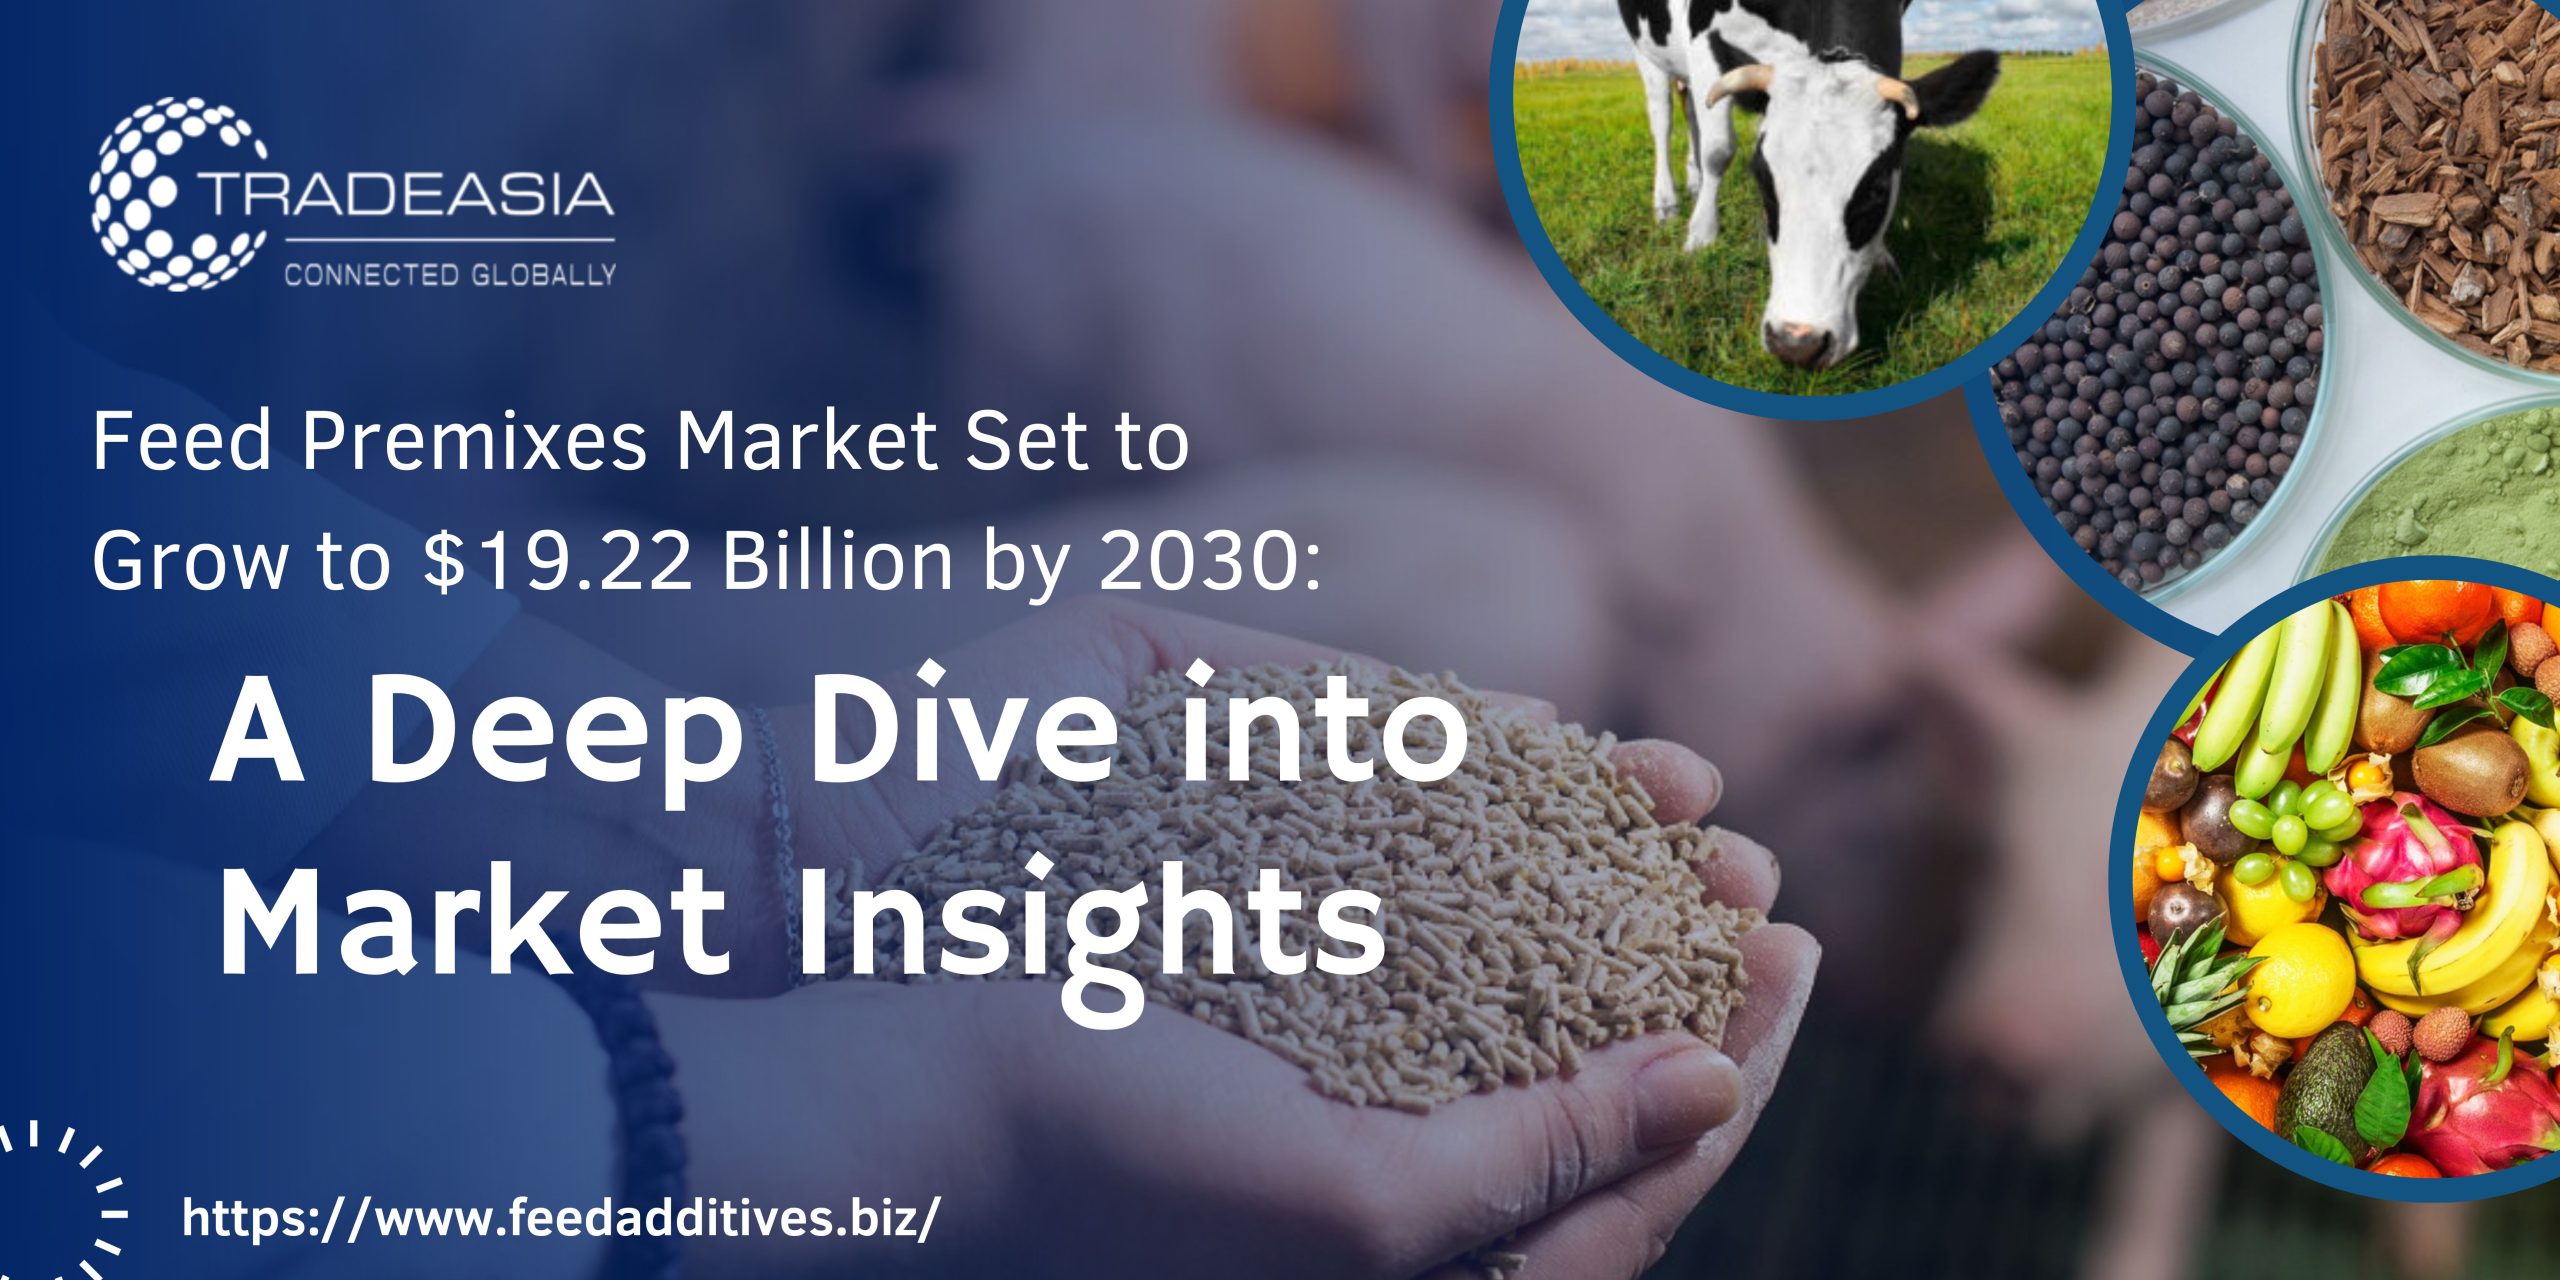 Feed Premixes Market Set to Grow to $19.22 Billion by 2030: A Deep Dive into Market Insights